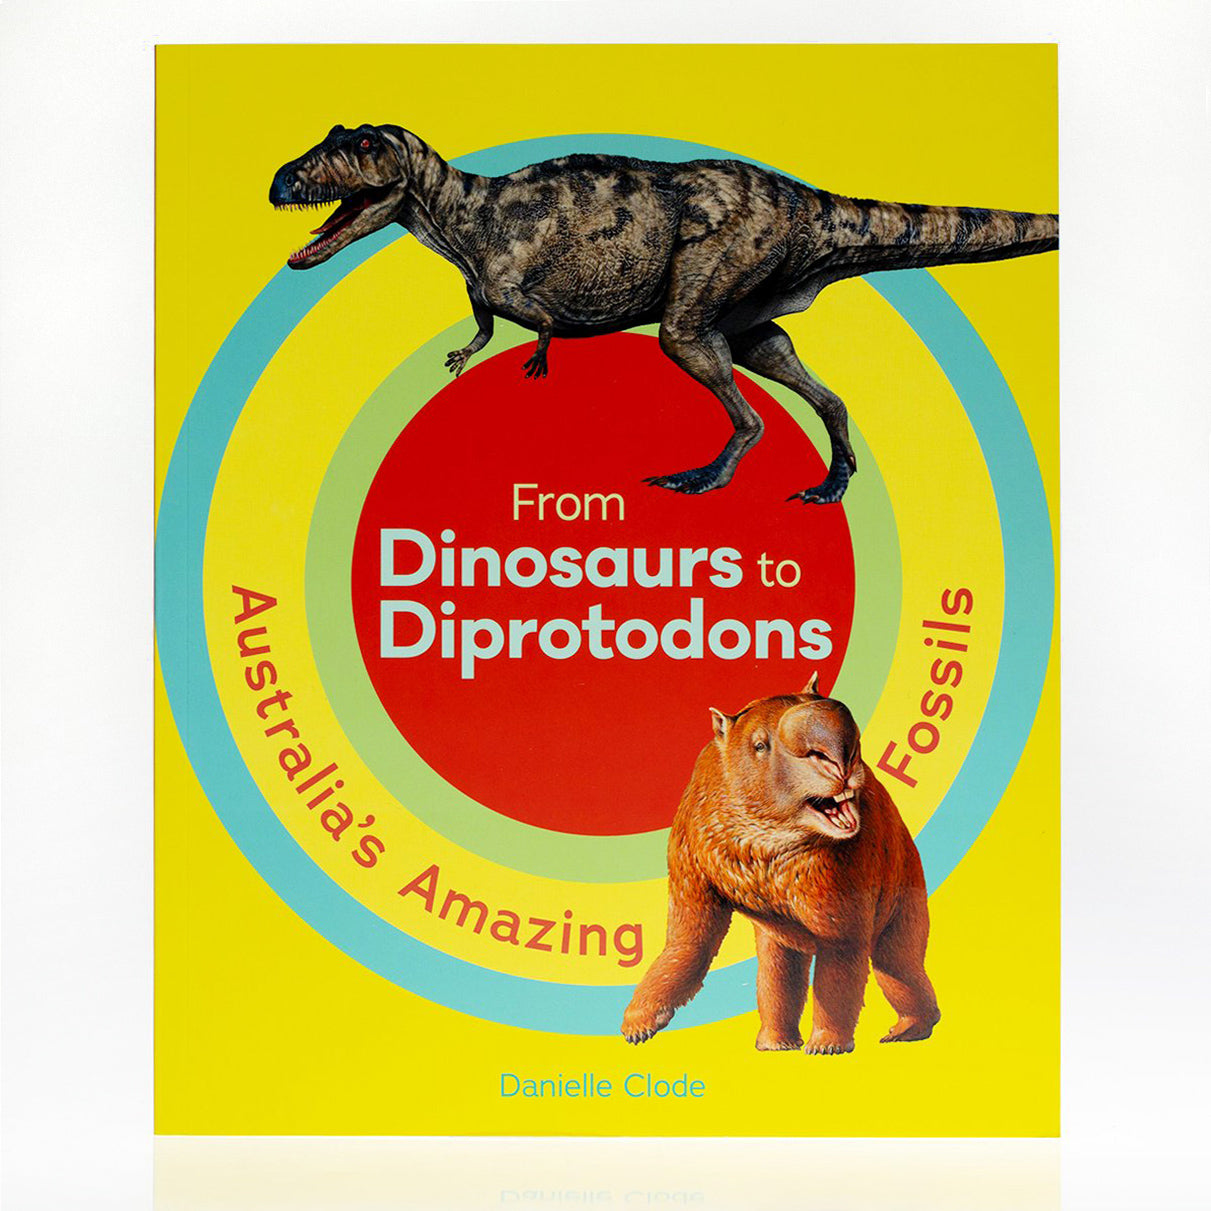 From Dinosaurs to Diprotodons